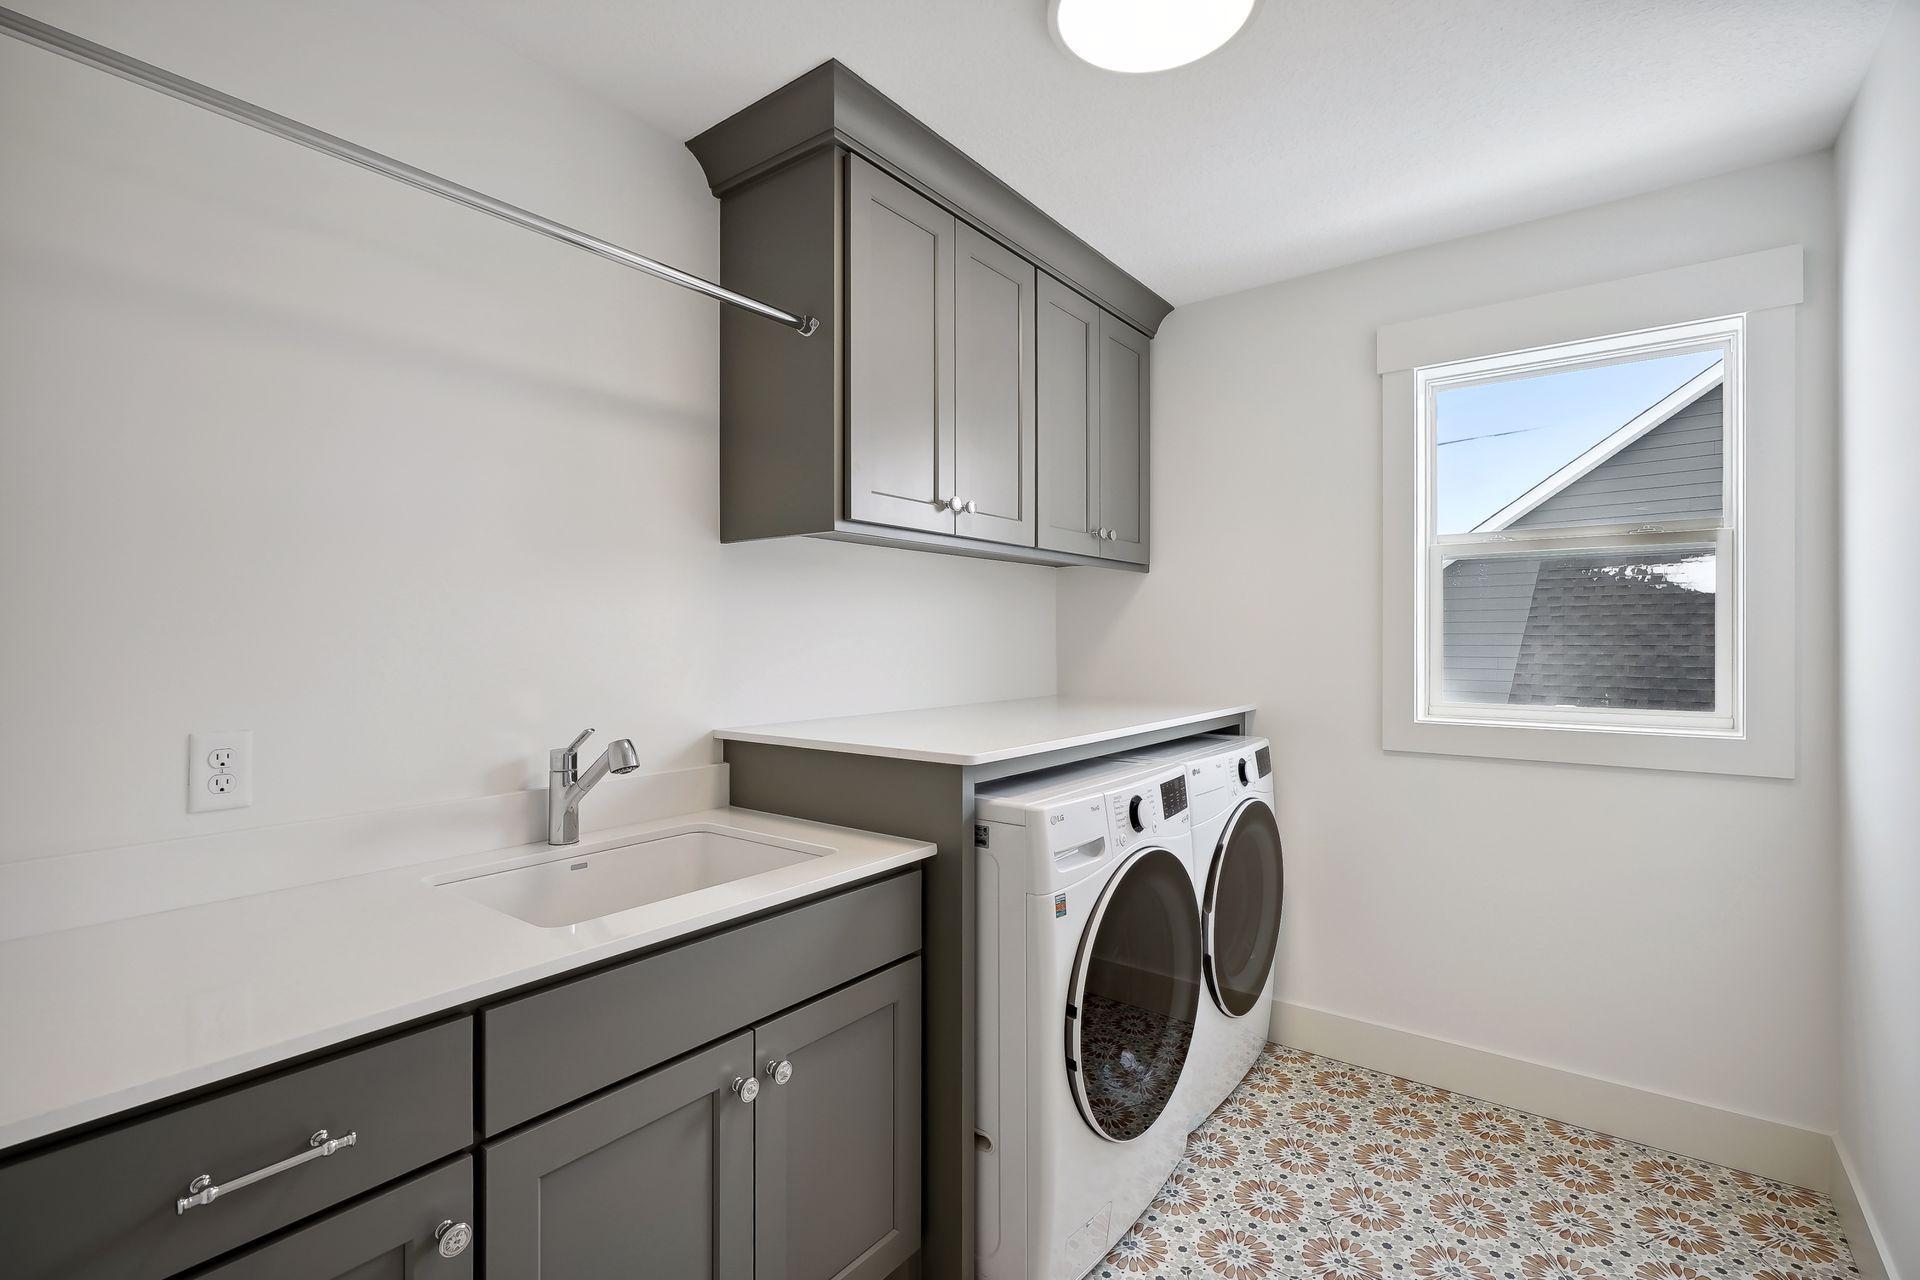 Second floor Laundry with extra cabinetry, countertop and tile flooring